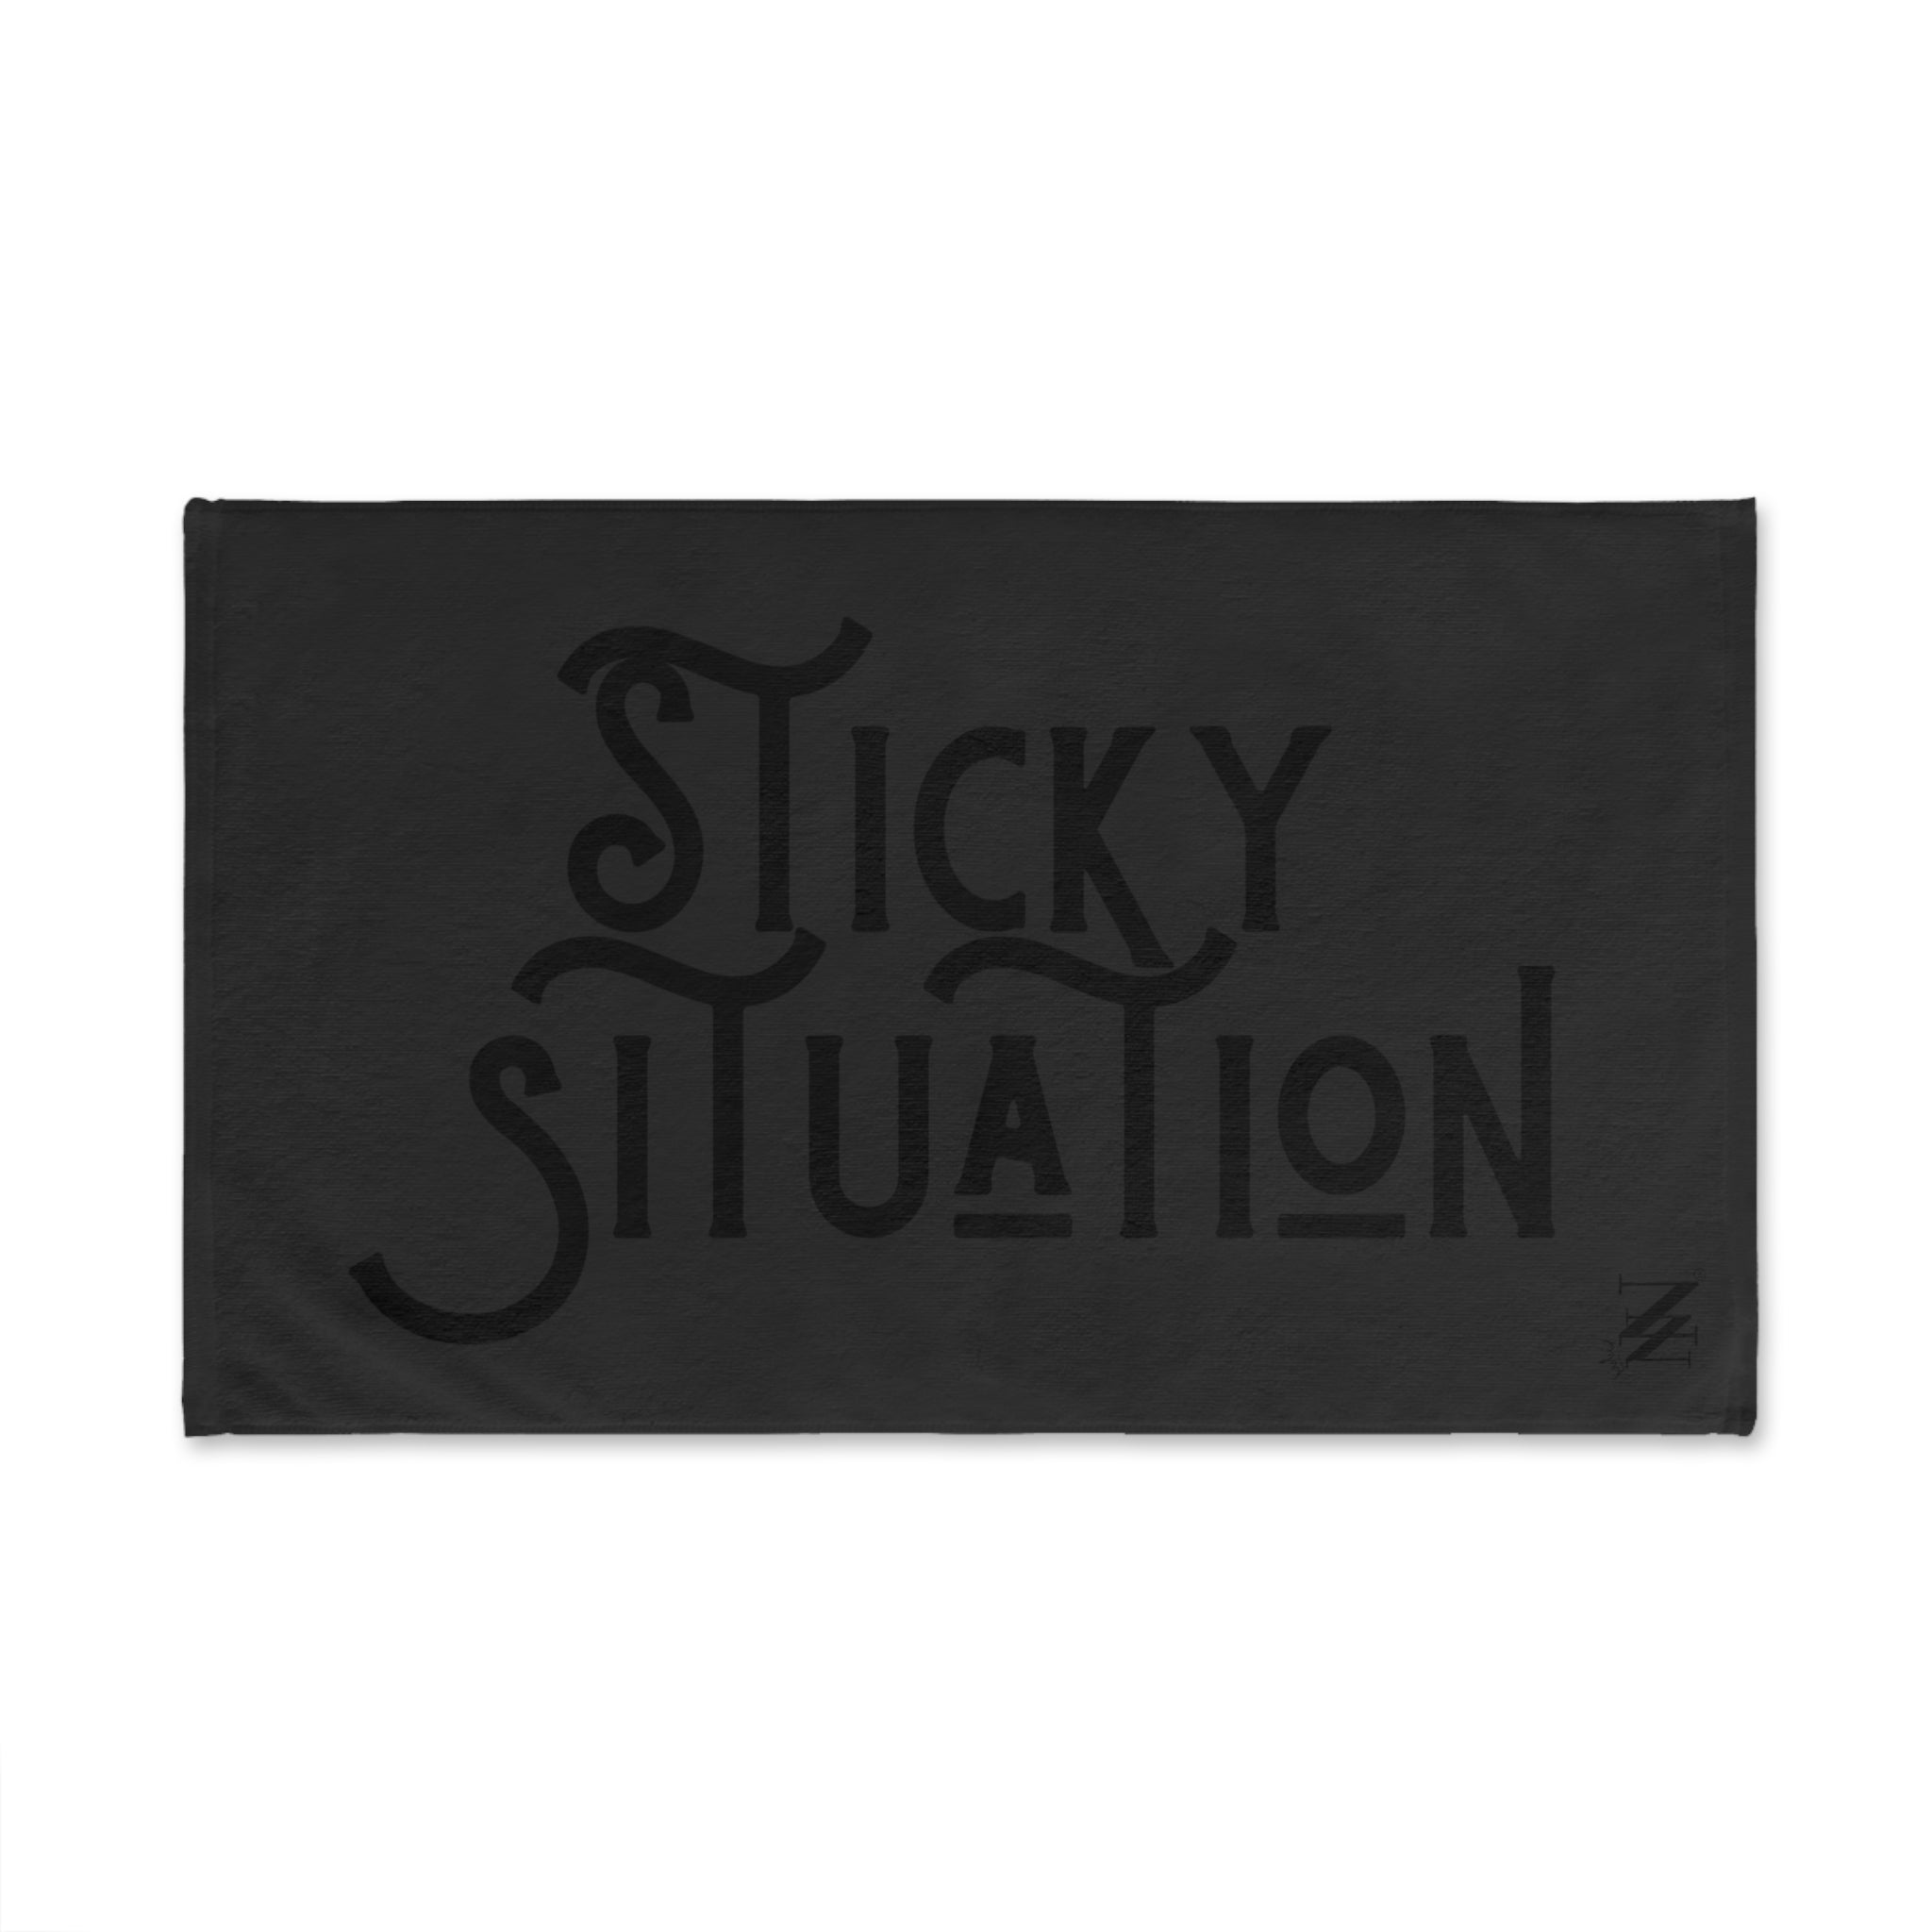 Sticky situation sex towel